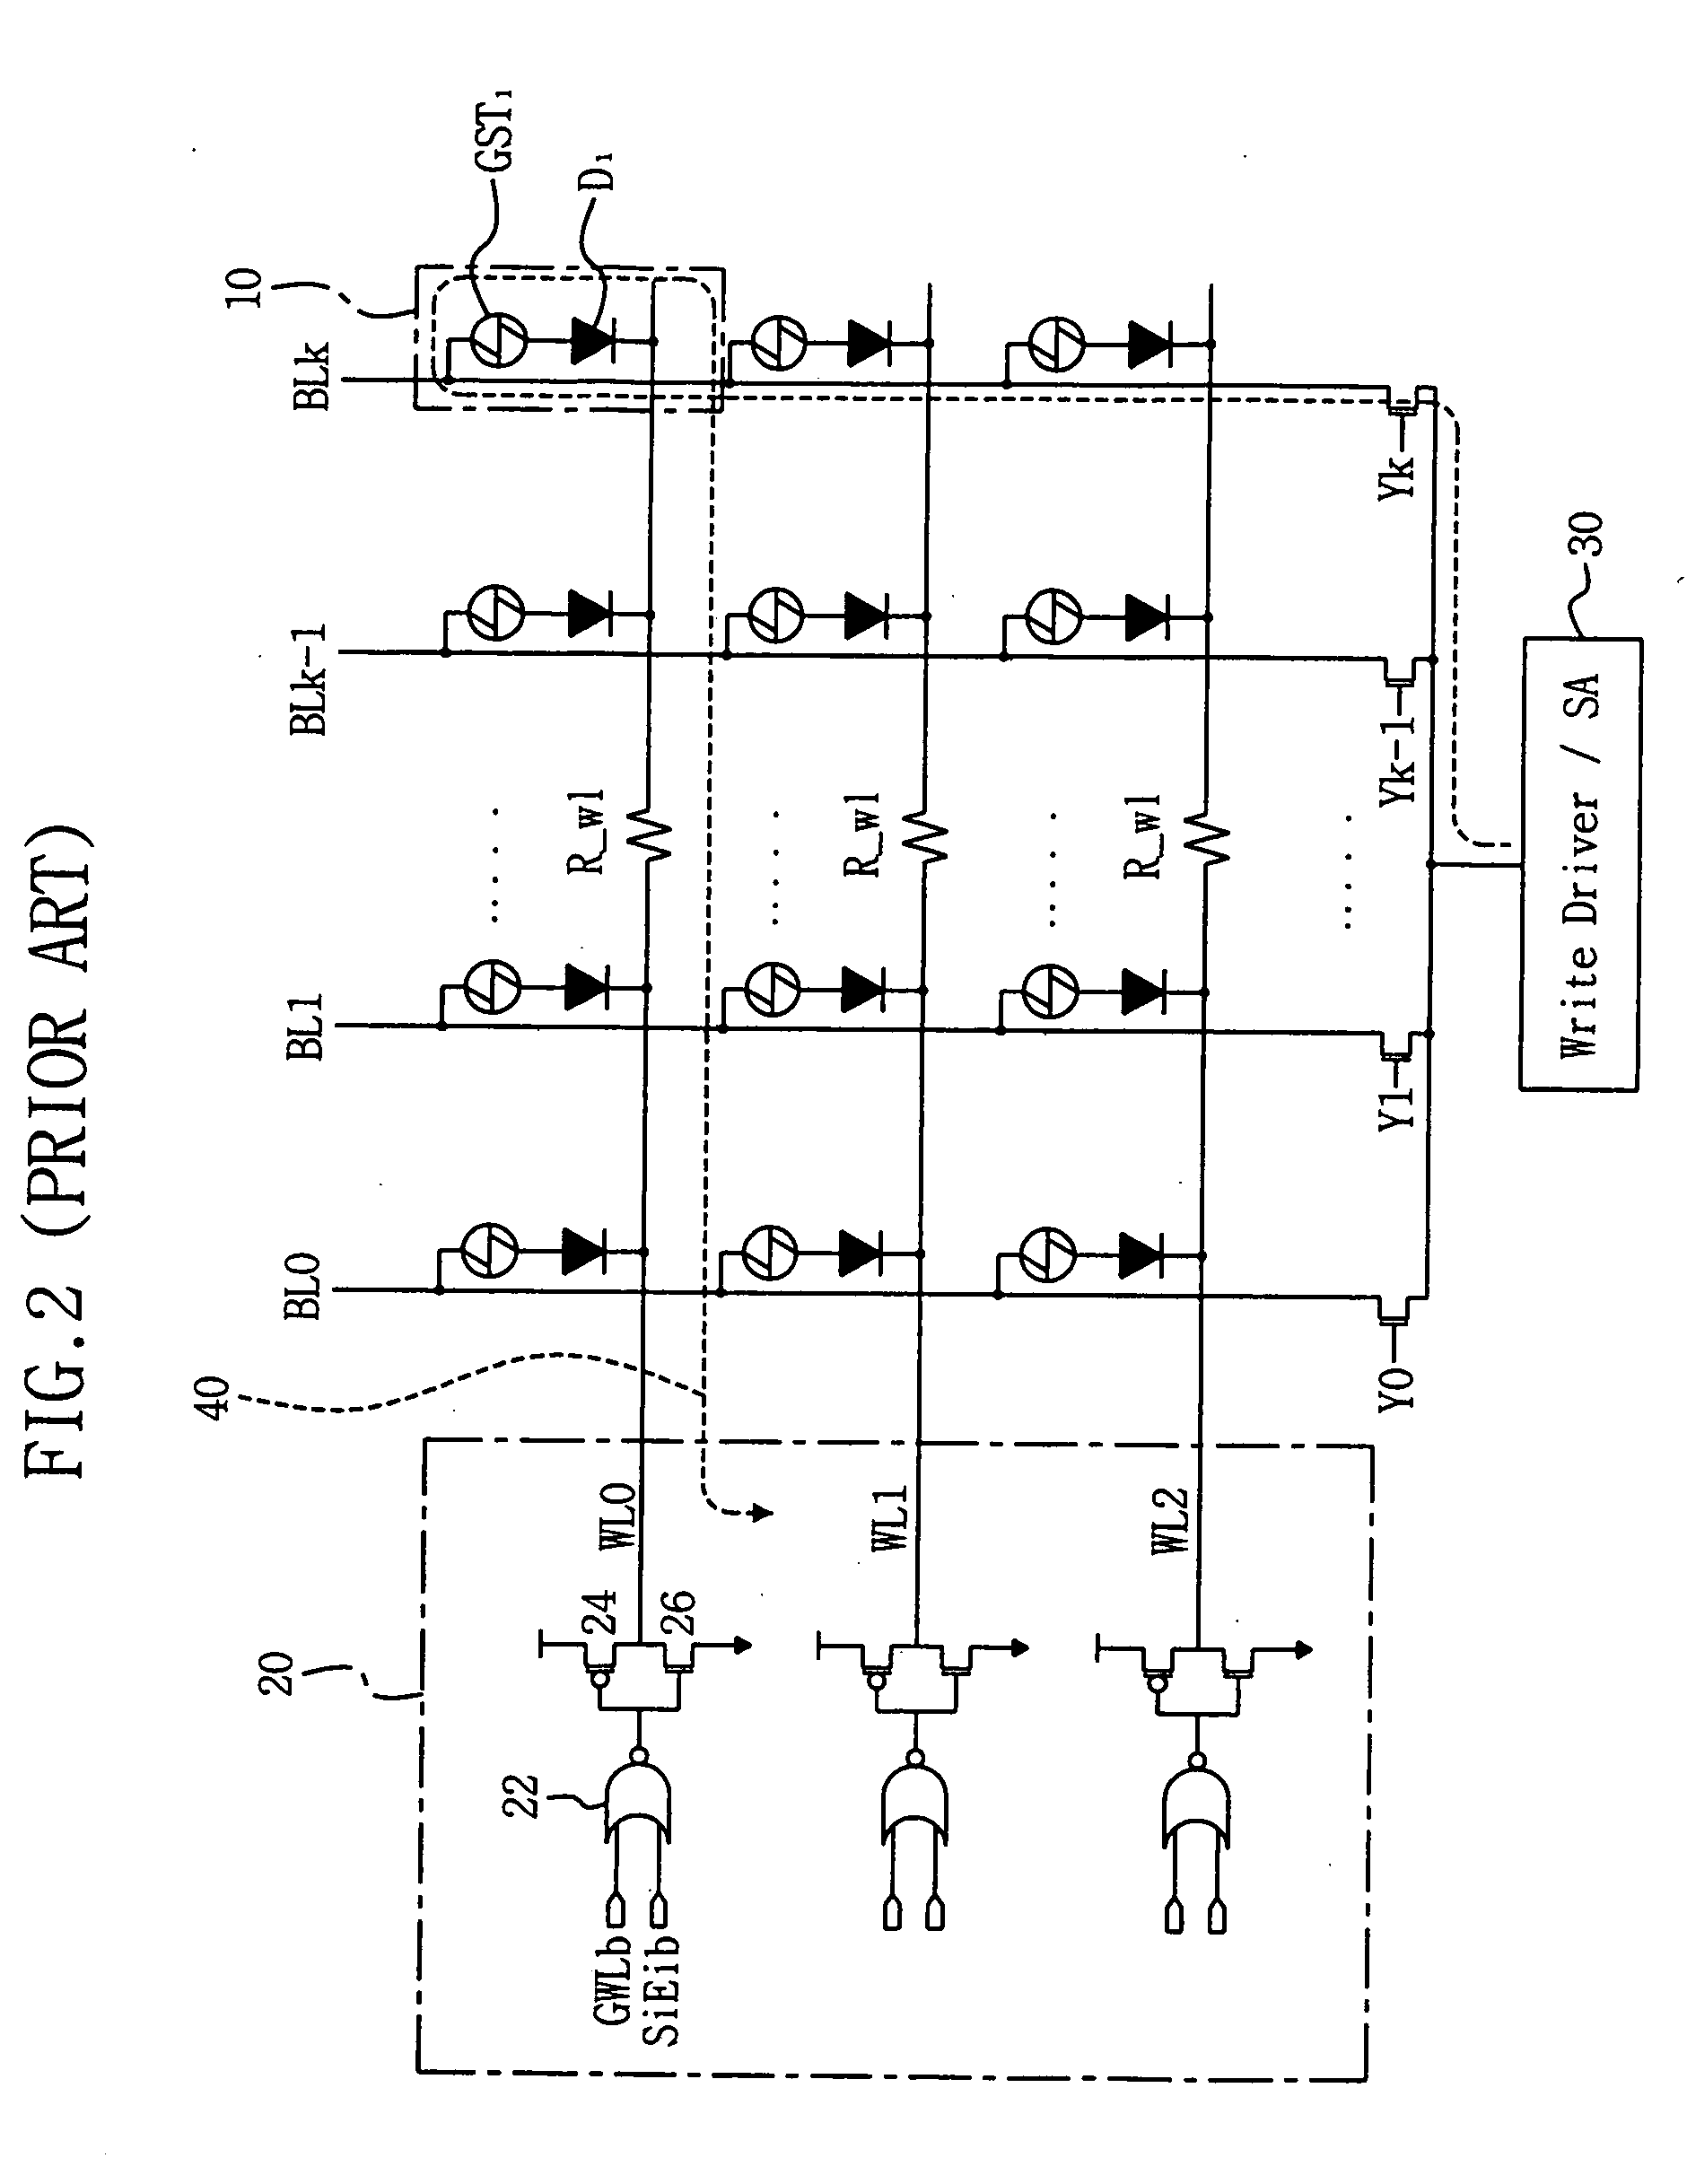 Memory device with reduced word line resistance